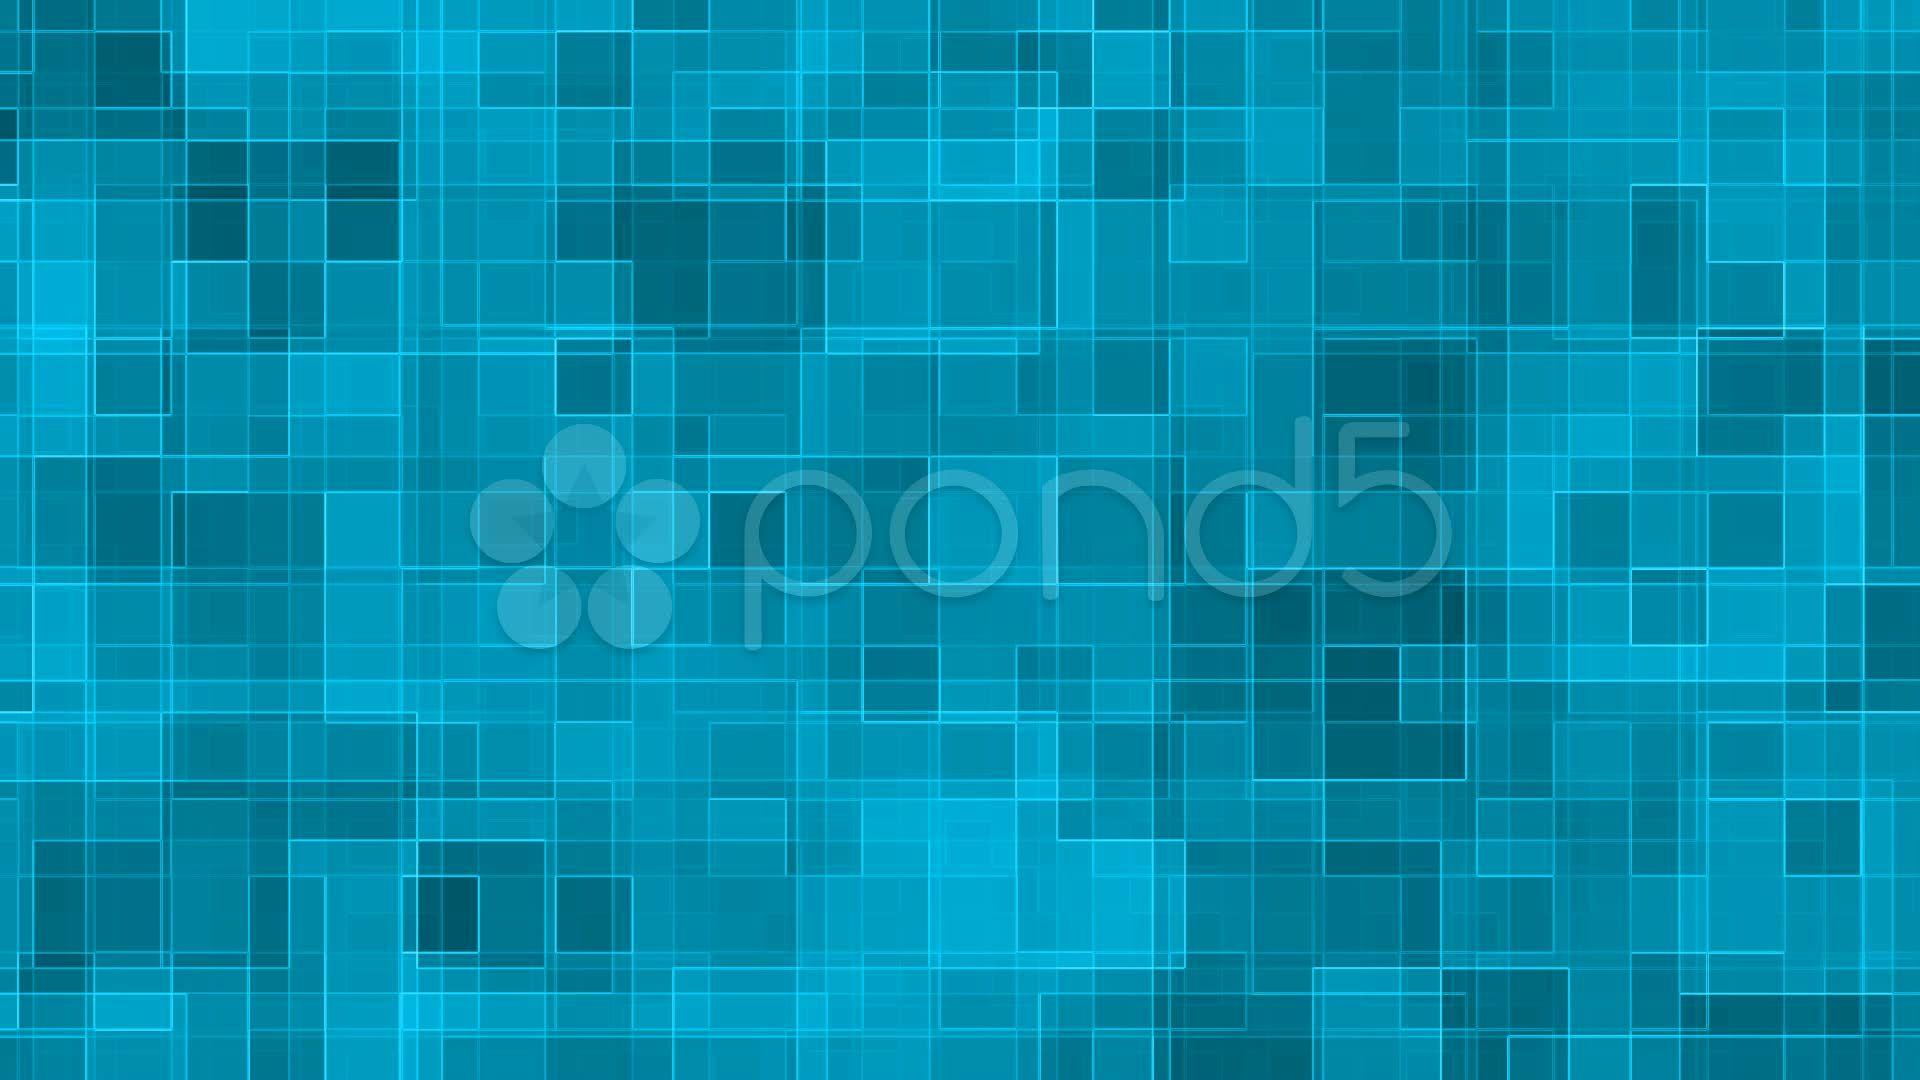 Cool Abstract Backgrounds DJ Logo - Blue Corporate Background Animation VJ DJ Stock Footage,#Background ...